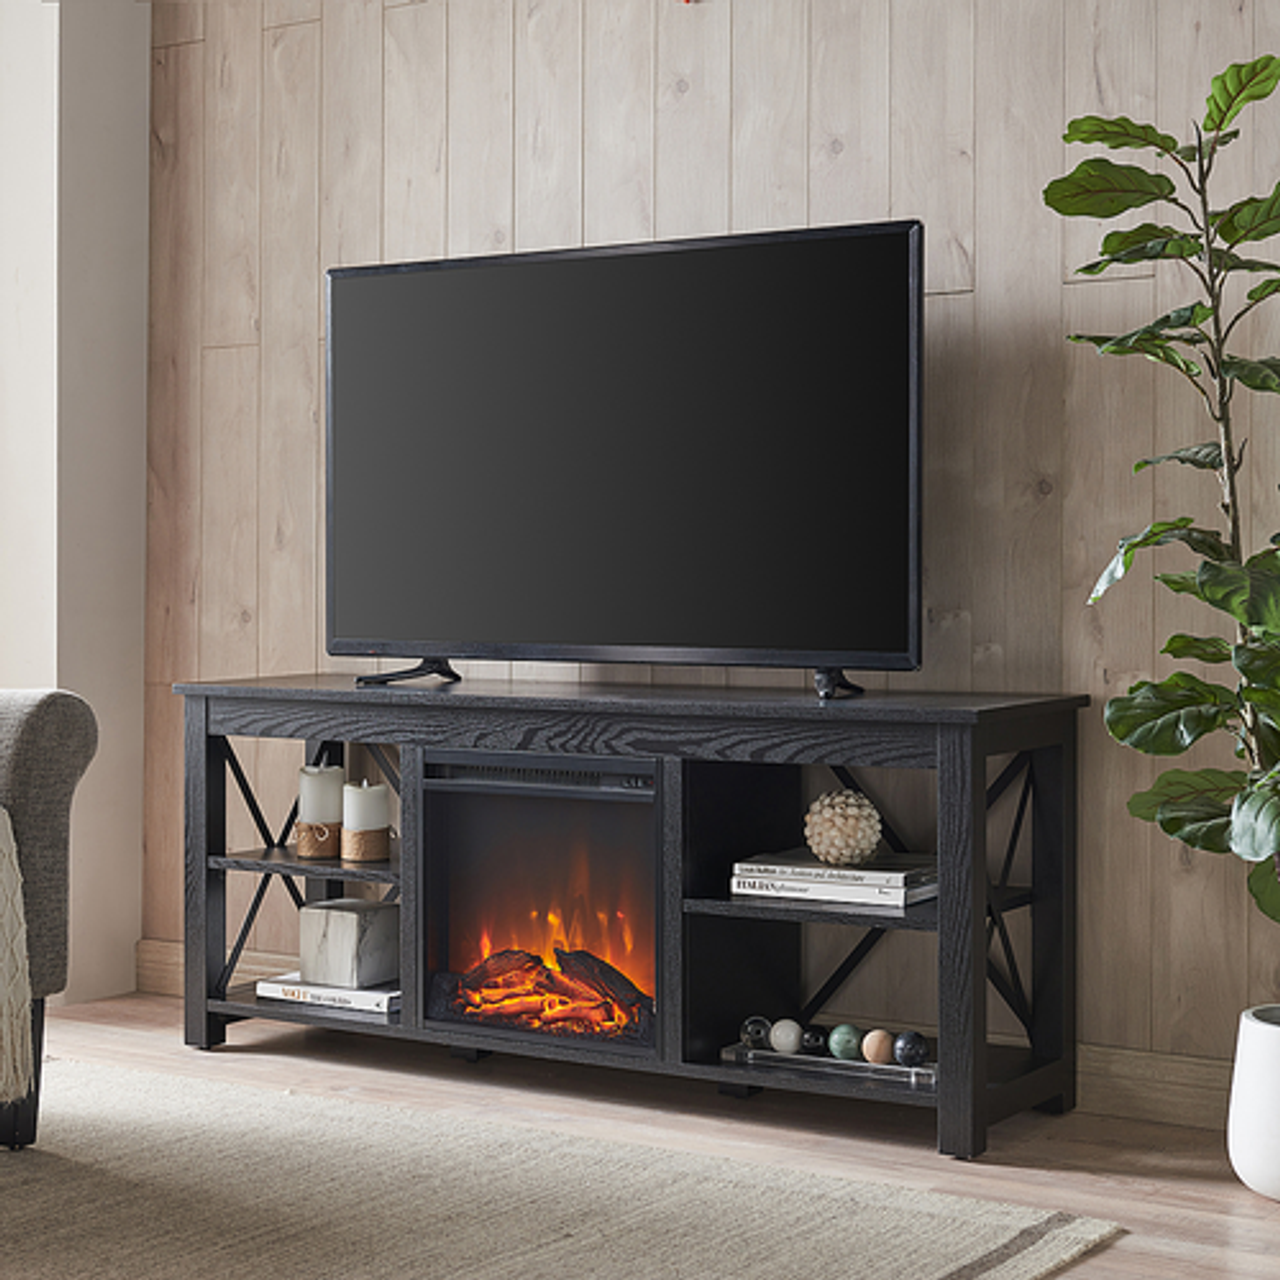 Camden&Wells - Sawyer Log Fireplace TV Stand for TVs up to 65" - Black